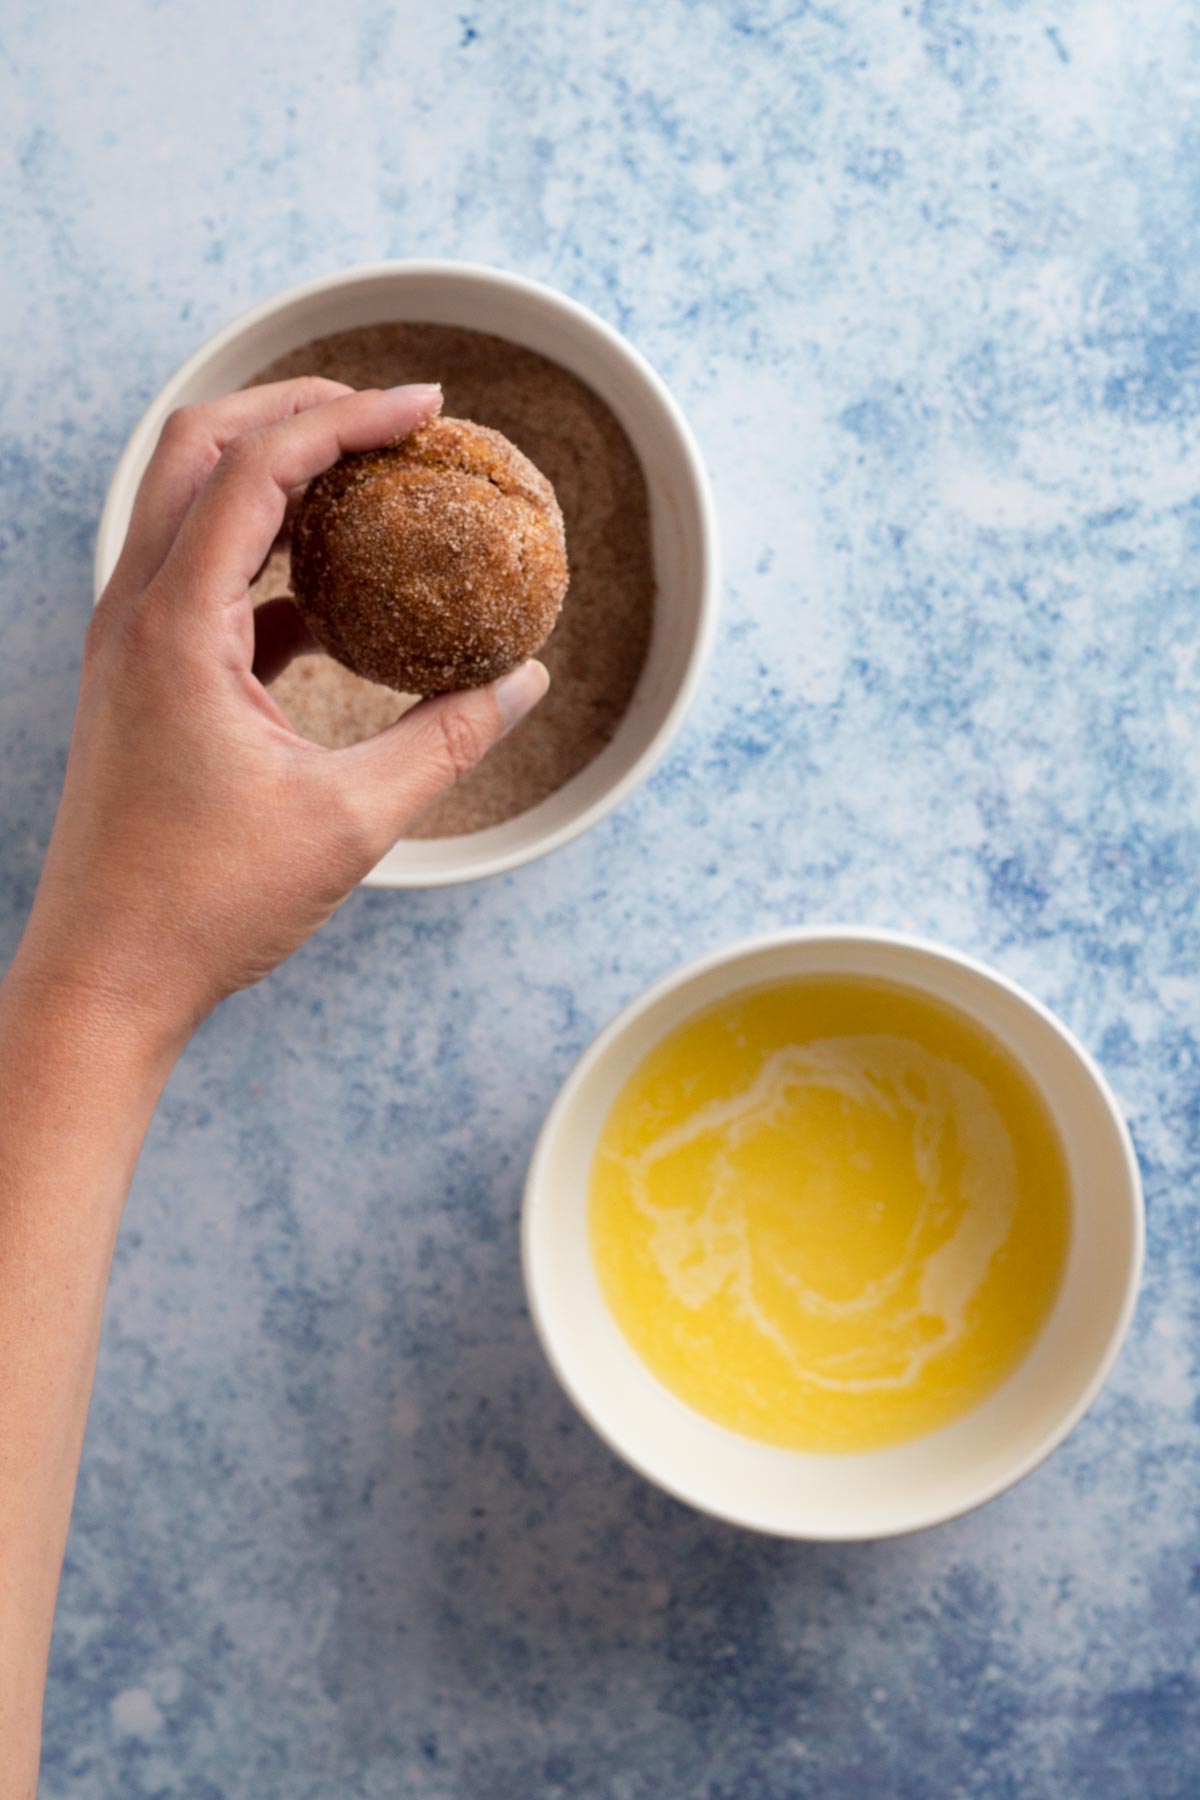 Hand holding donut muffin coated in cinnamon sugar with bowls of melted butter and cinnamon sugar.